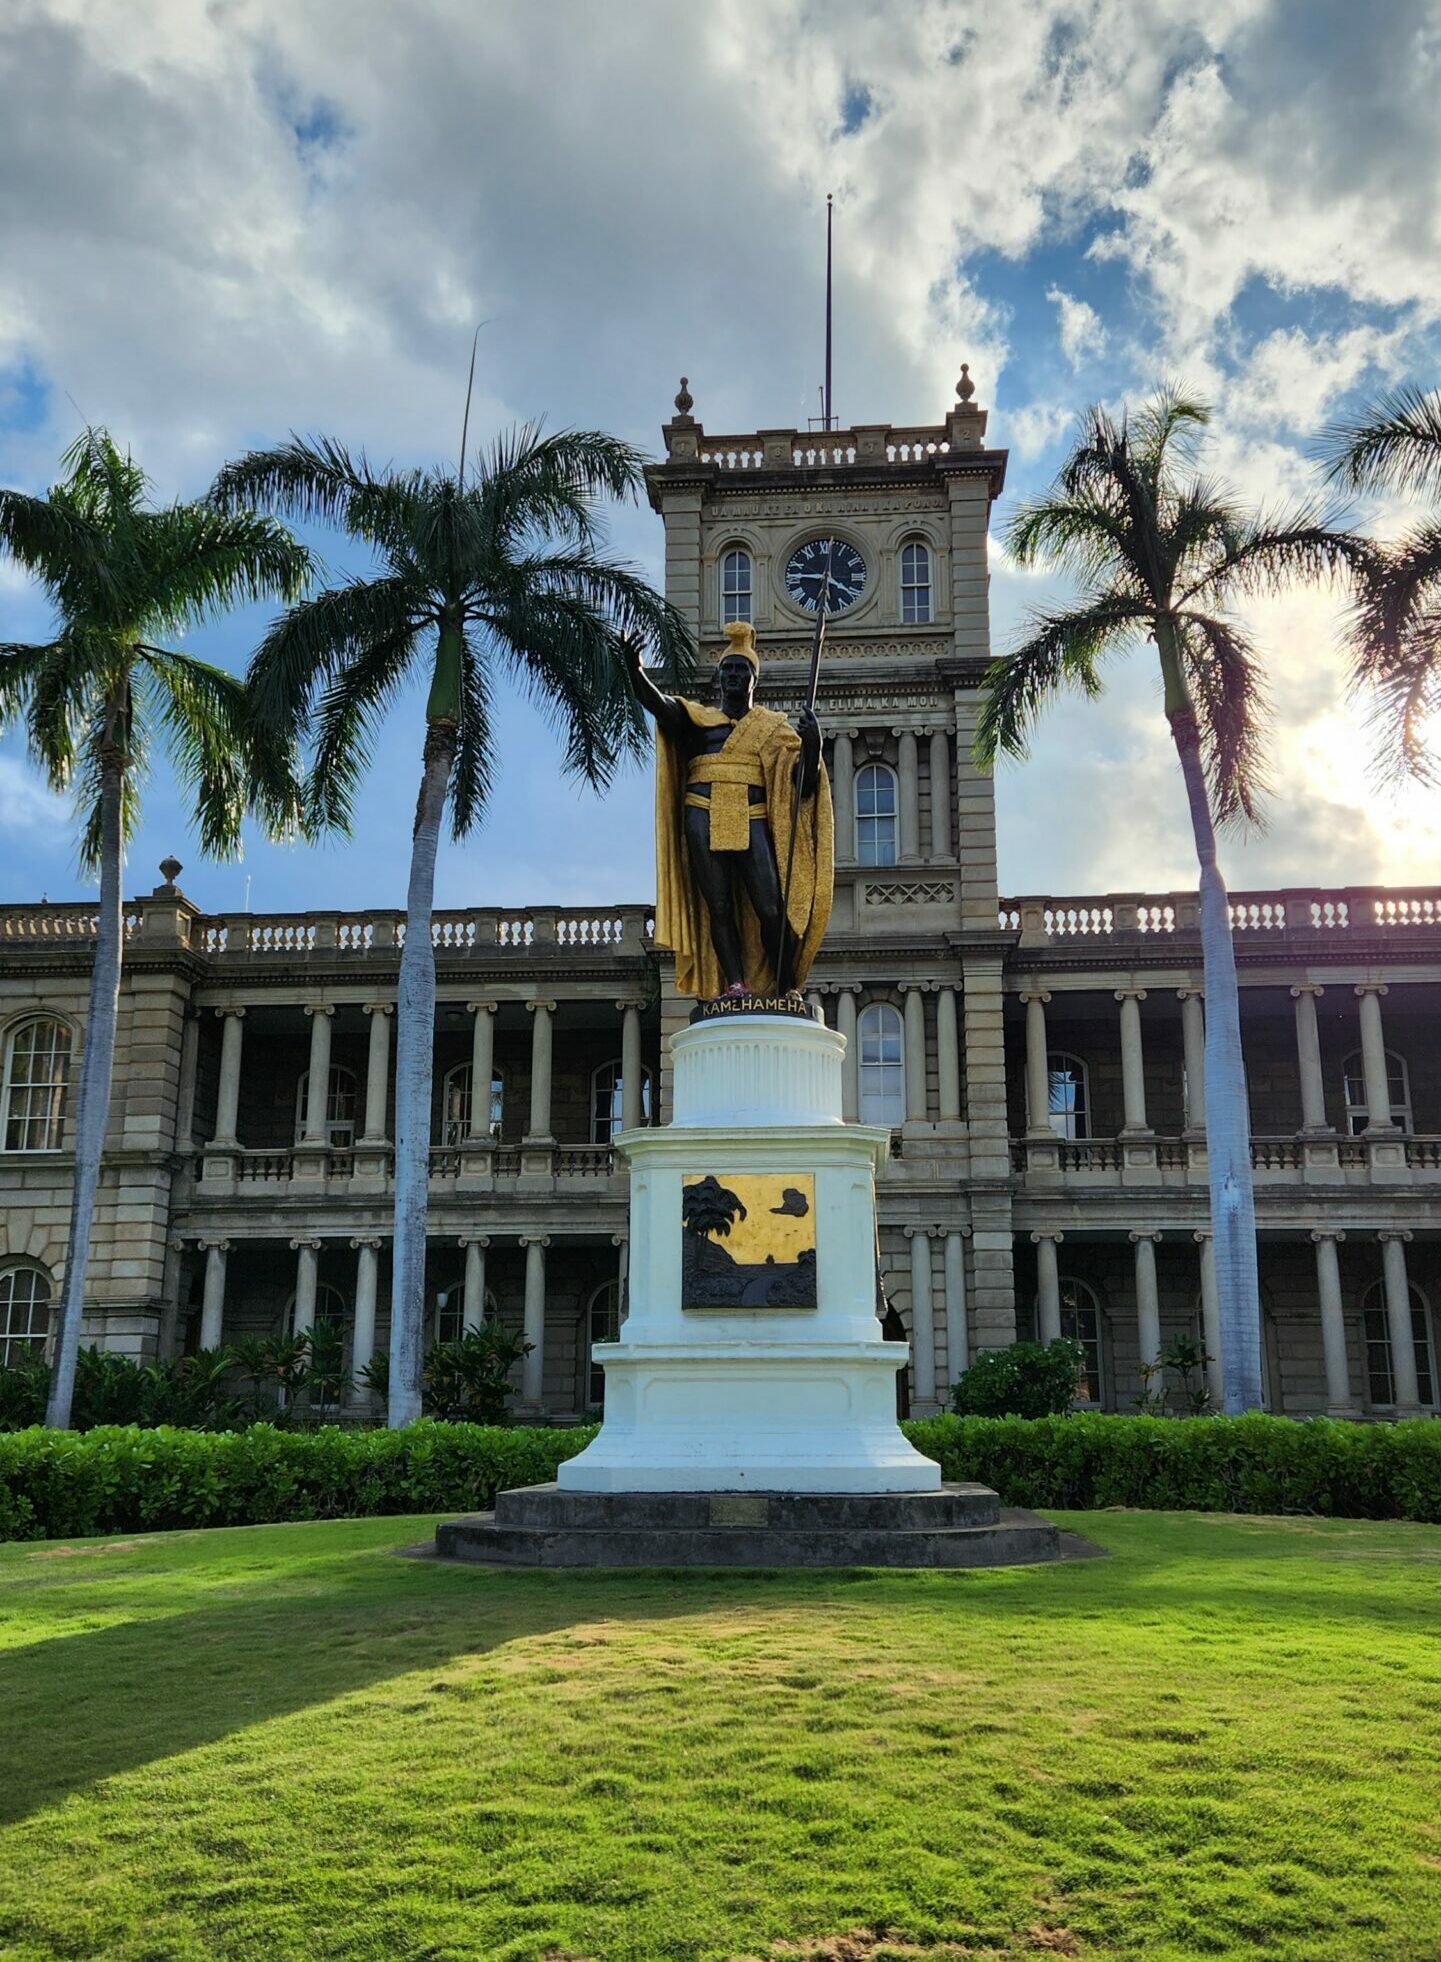 The King Kamehameha statue stand in front of the Hawaii State Supreme Court in Honolulu, Hawaii.